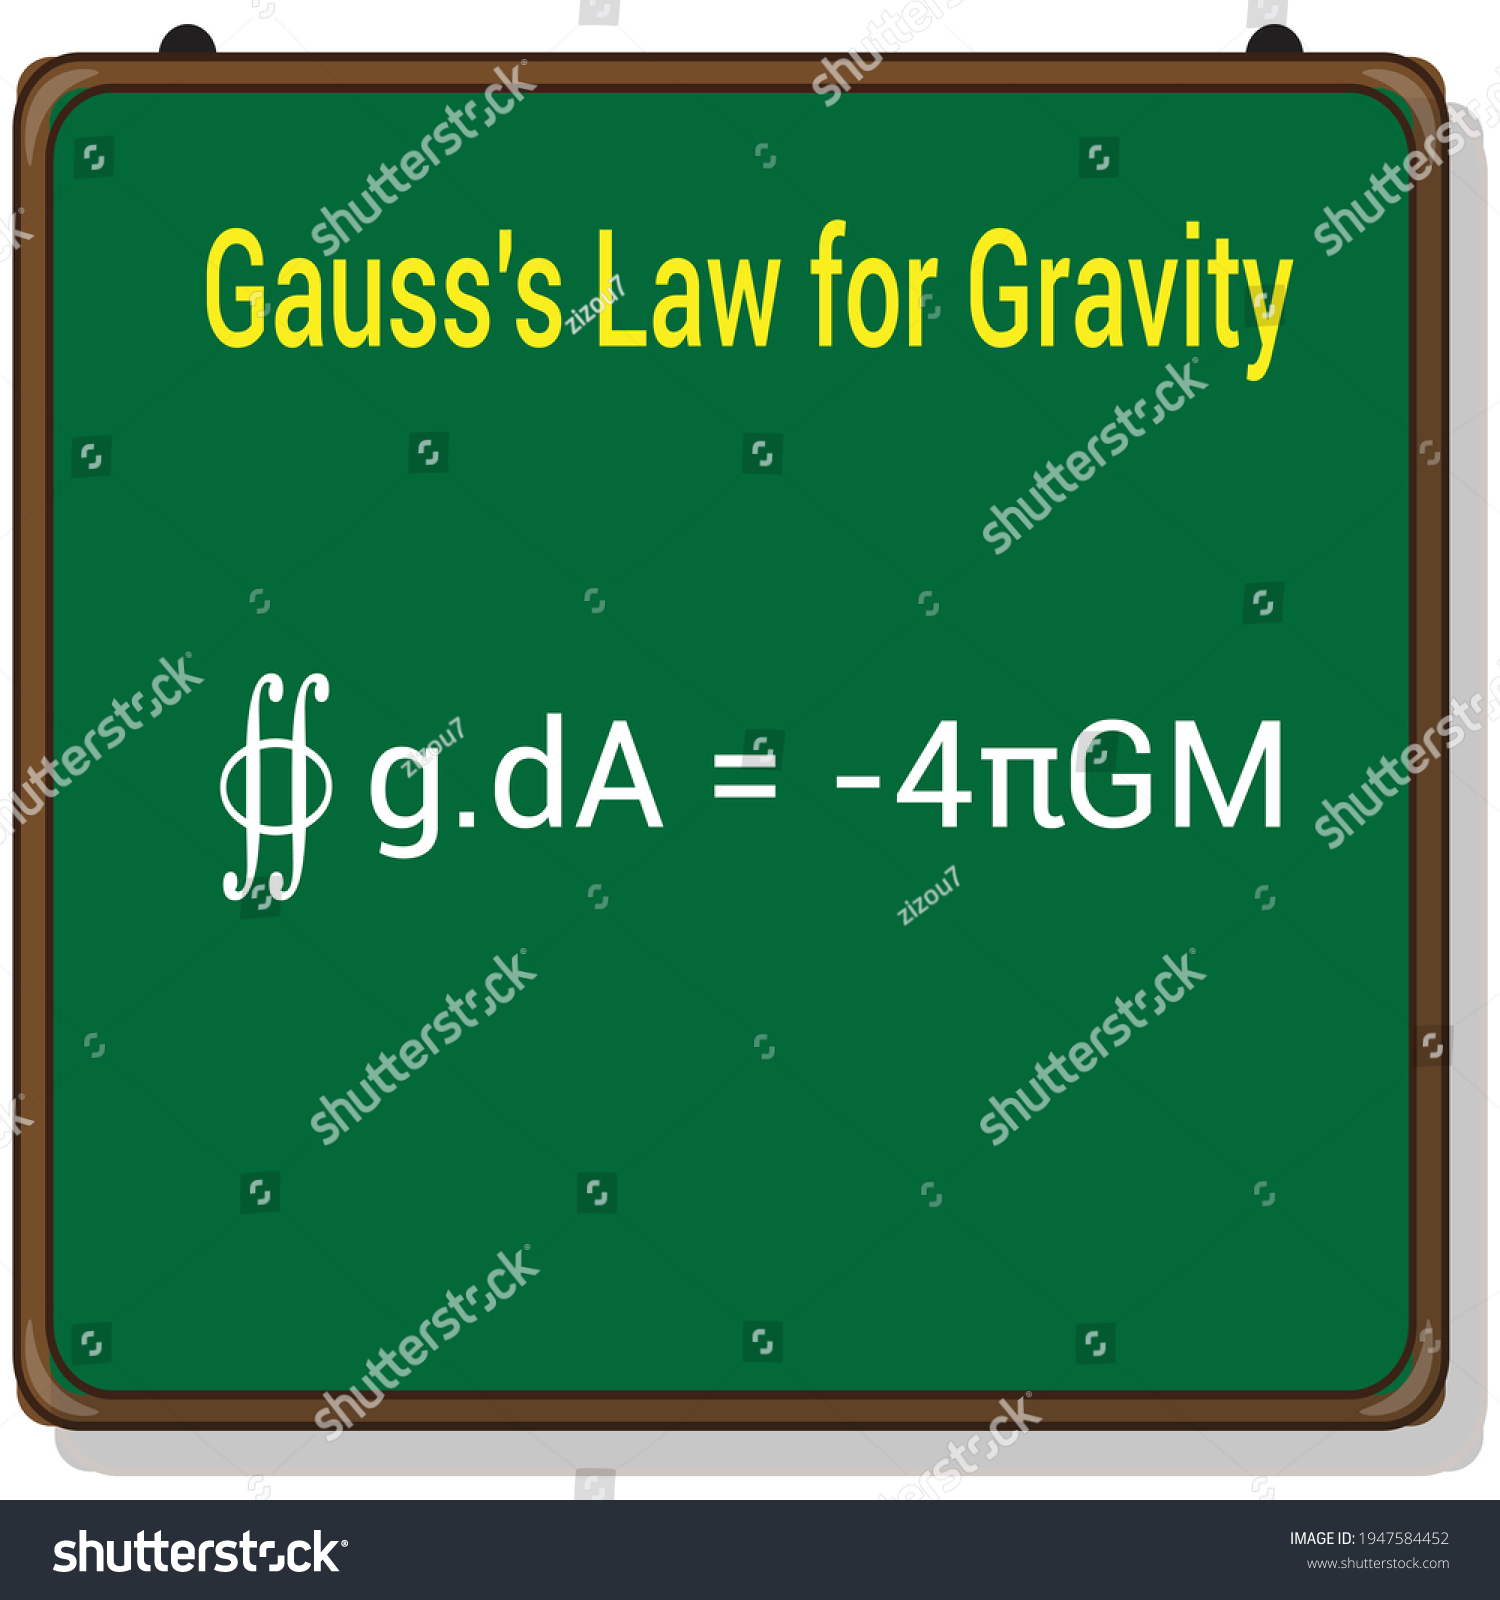 Gausss Law For Gravity Equation Royalty Free Stock Vector 1947584452 5491